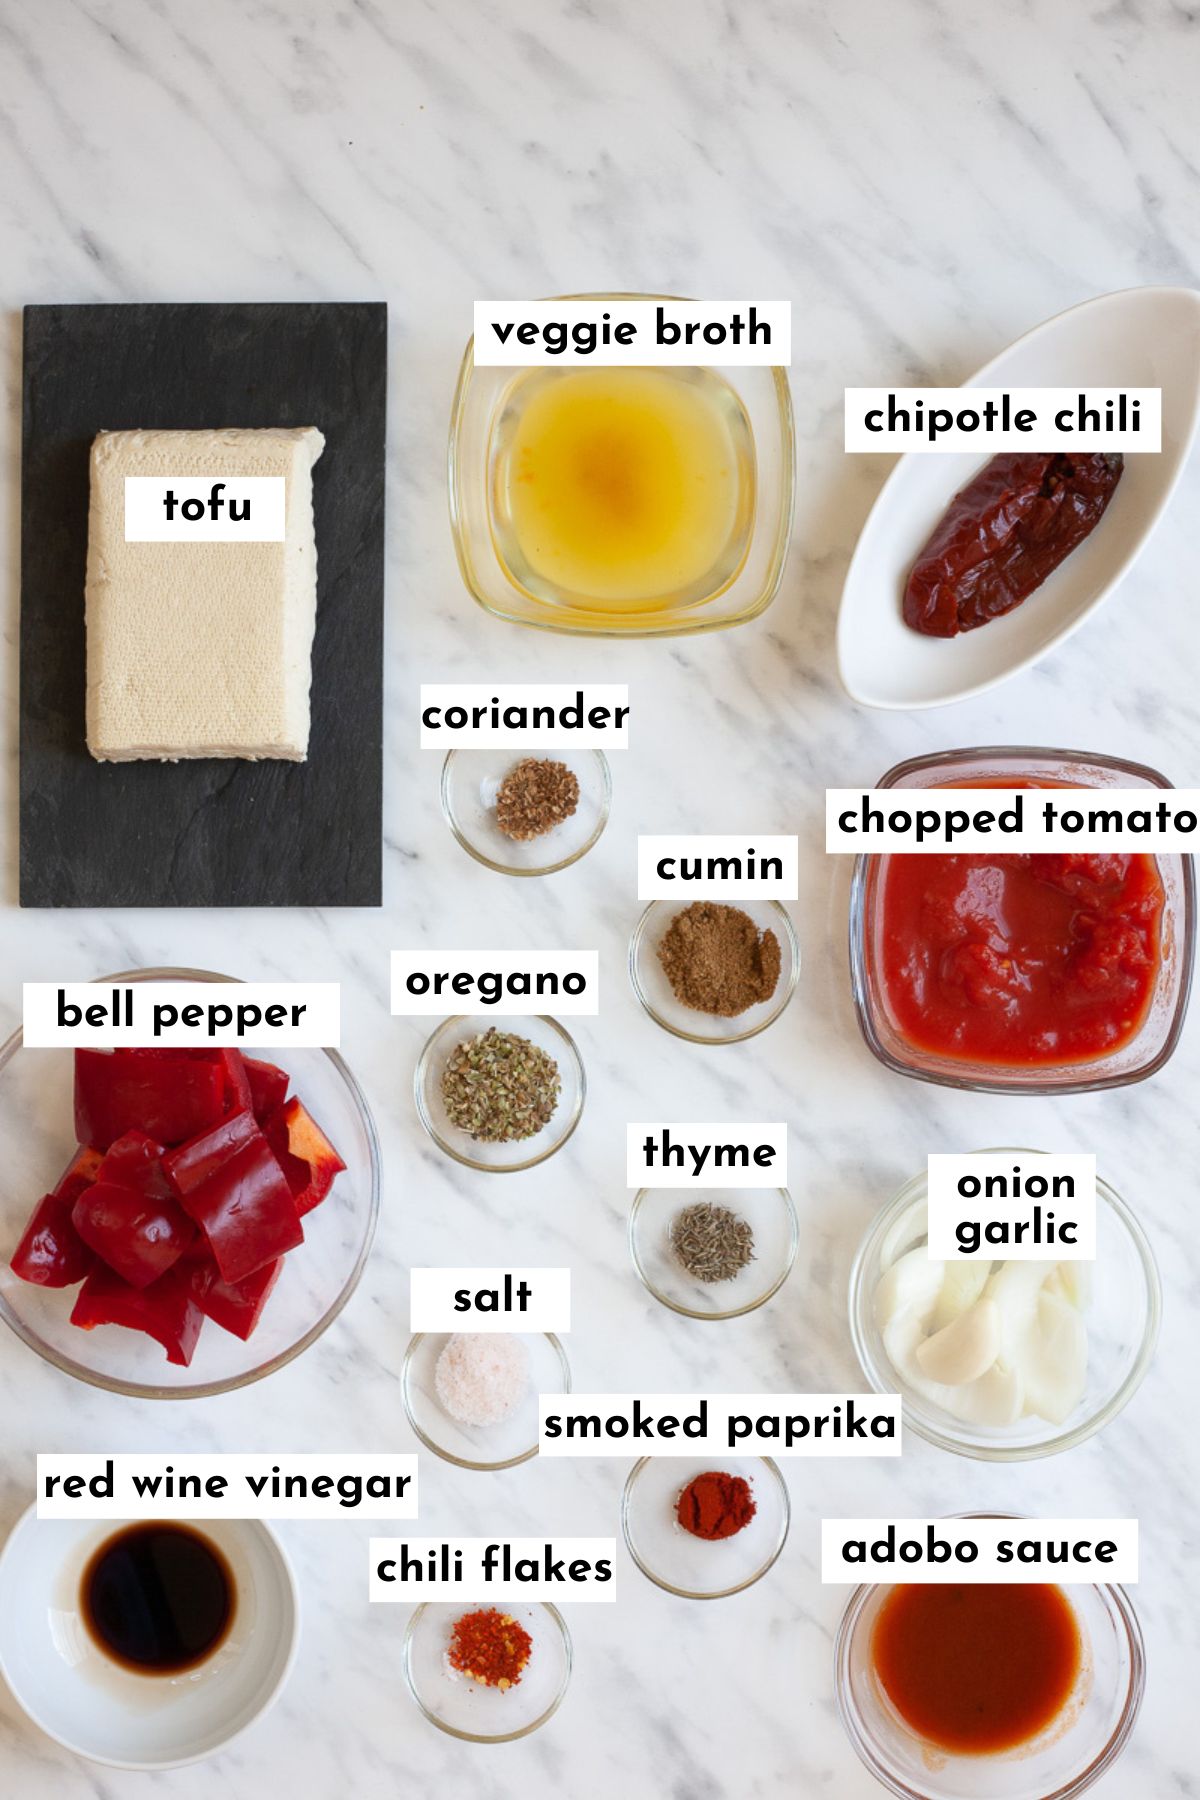 The ingredients of chipotle sofritas in small glass bowls including tofu, veggie broth, chili peppers, chopped red pepper, chopped tomatoes, red sauces and lots of spices. 